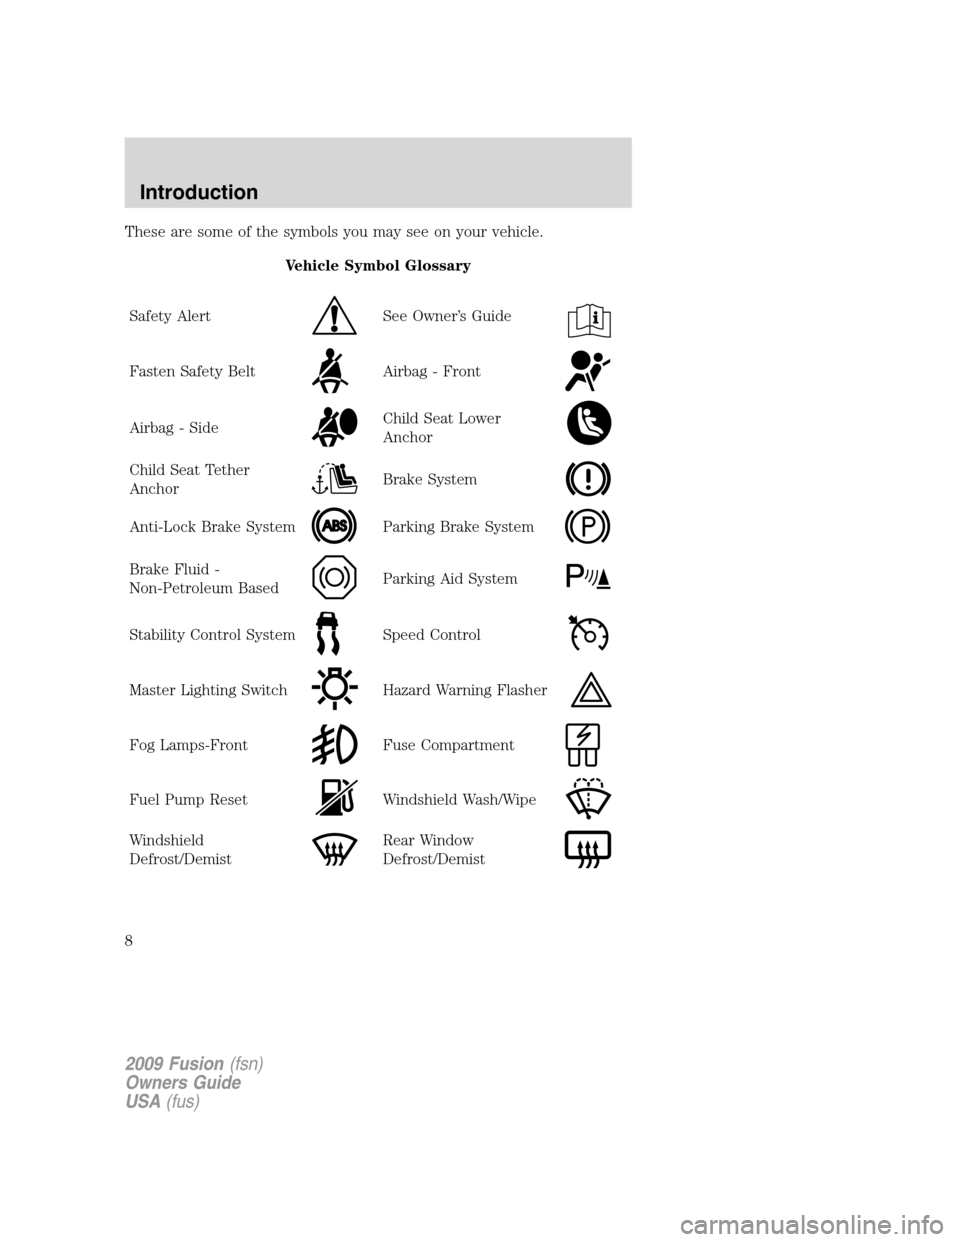 FORD FUSION (AMERICAS) 2009 1.G Owners Manual These are some of the symbols you may see on your vehicle.
Vehicle Symbol Glossary
Safety Alert
See Owner’s Guide
Fasten Safety BeltAirbag - Front
Airbag - SideChild Seat Lower
Anchor
Child Seat Tet